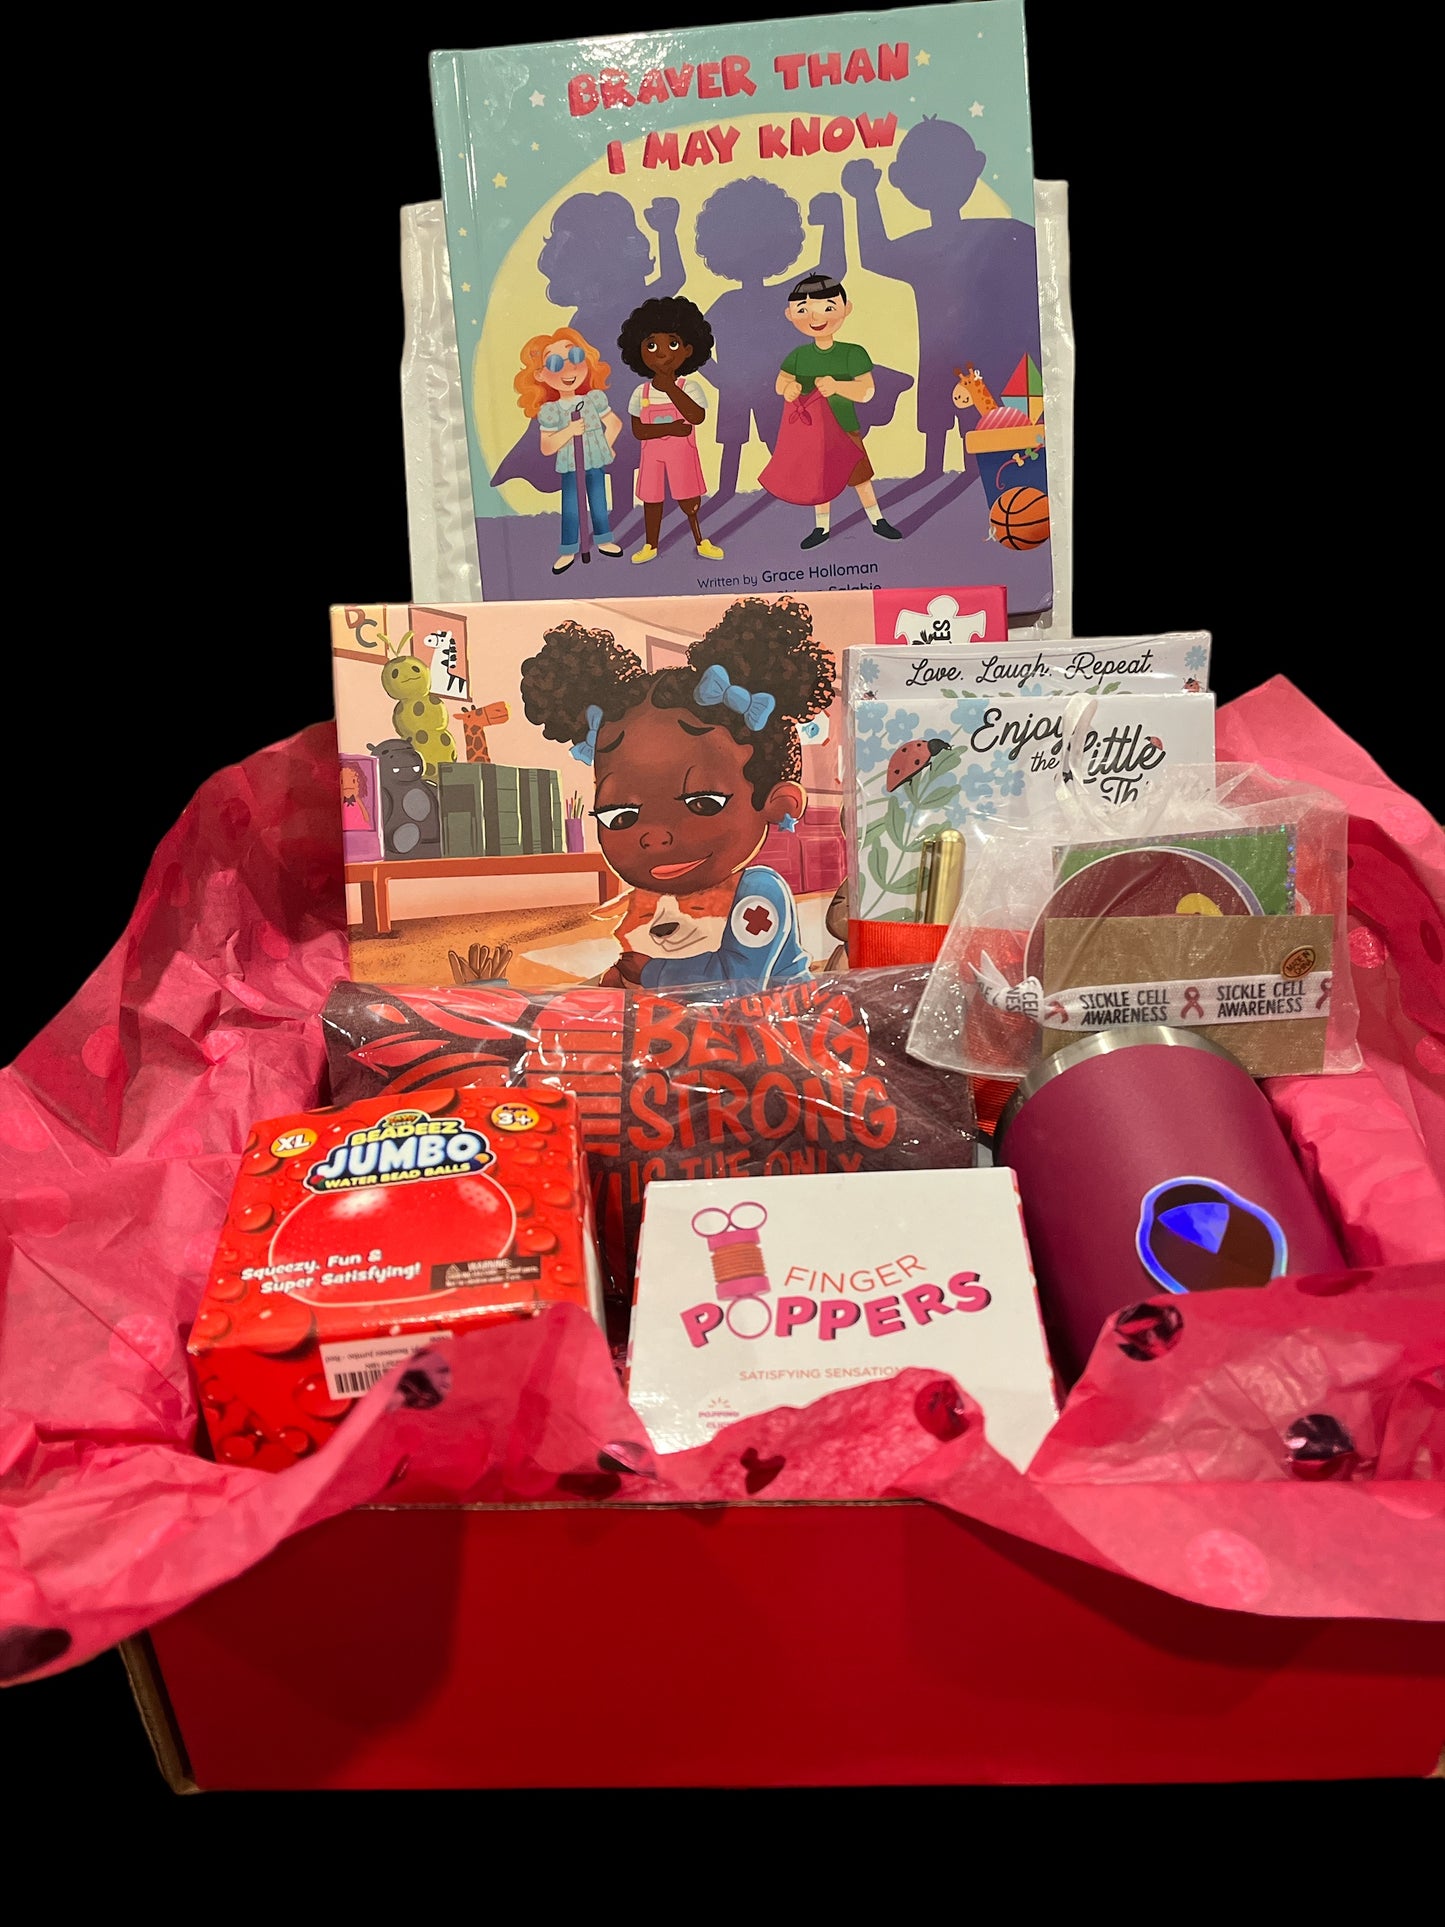 September Box: The “WARRIOR” Box (Sickle Cell)